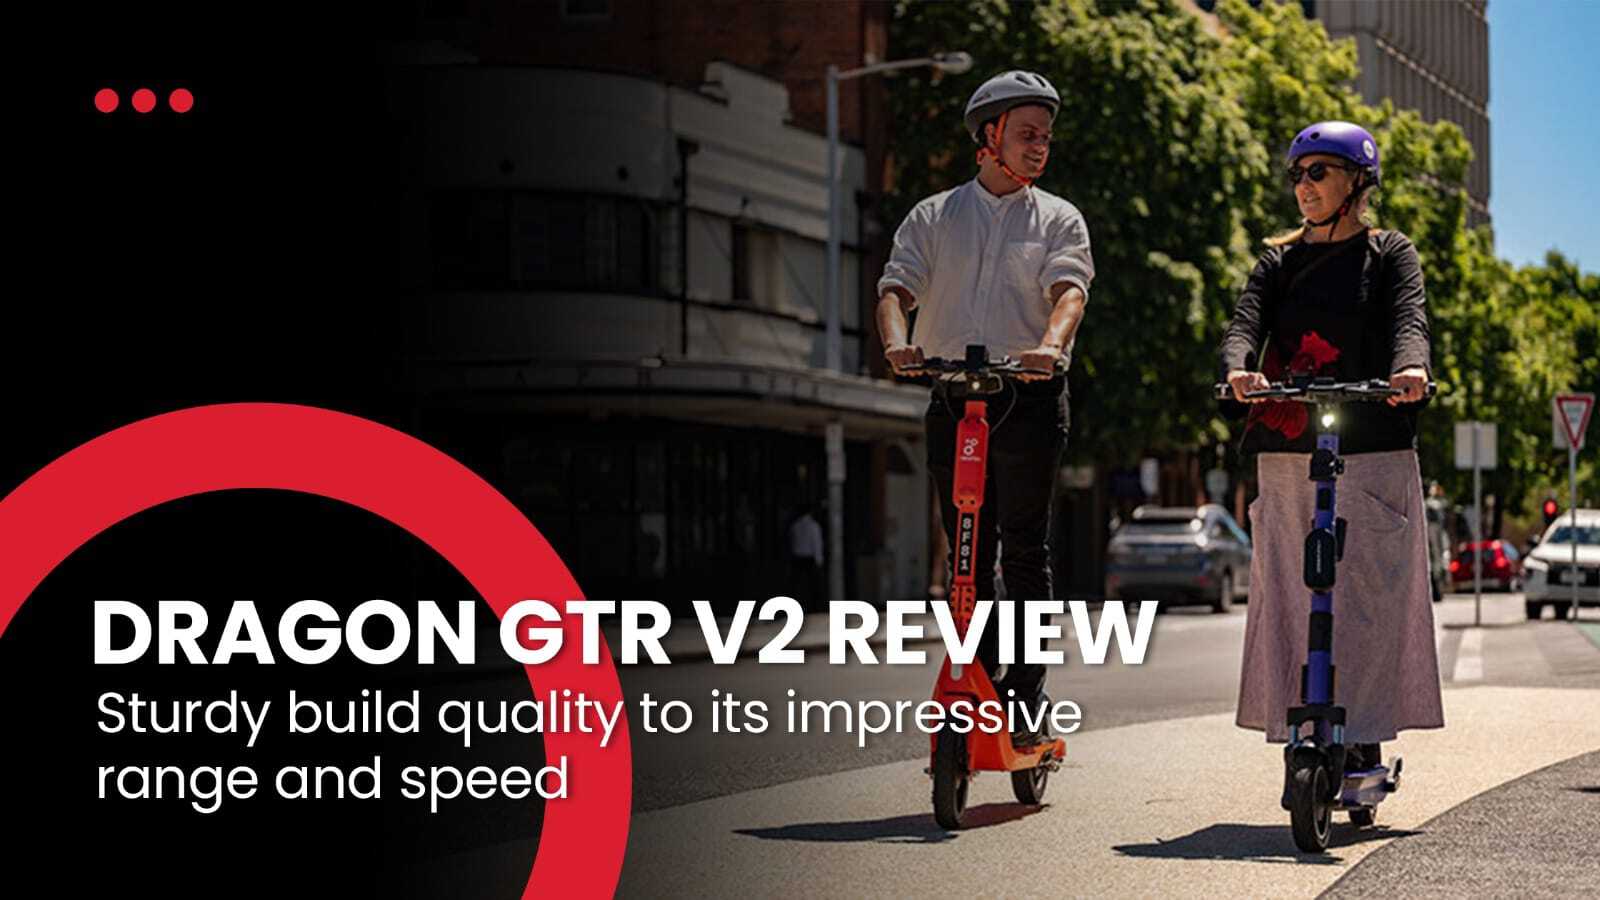 The Dragon GTR V2 Review: What You Need to Know Before You Buy